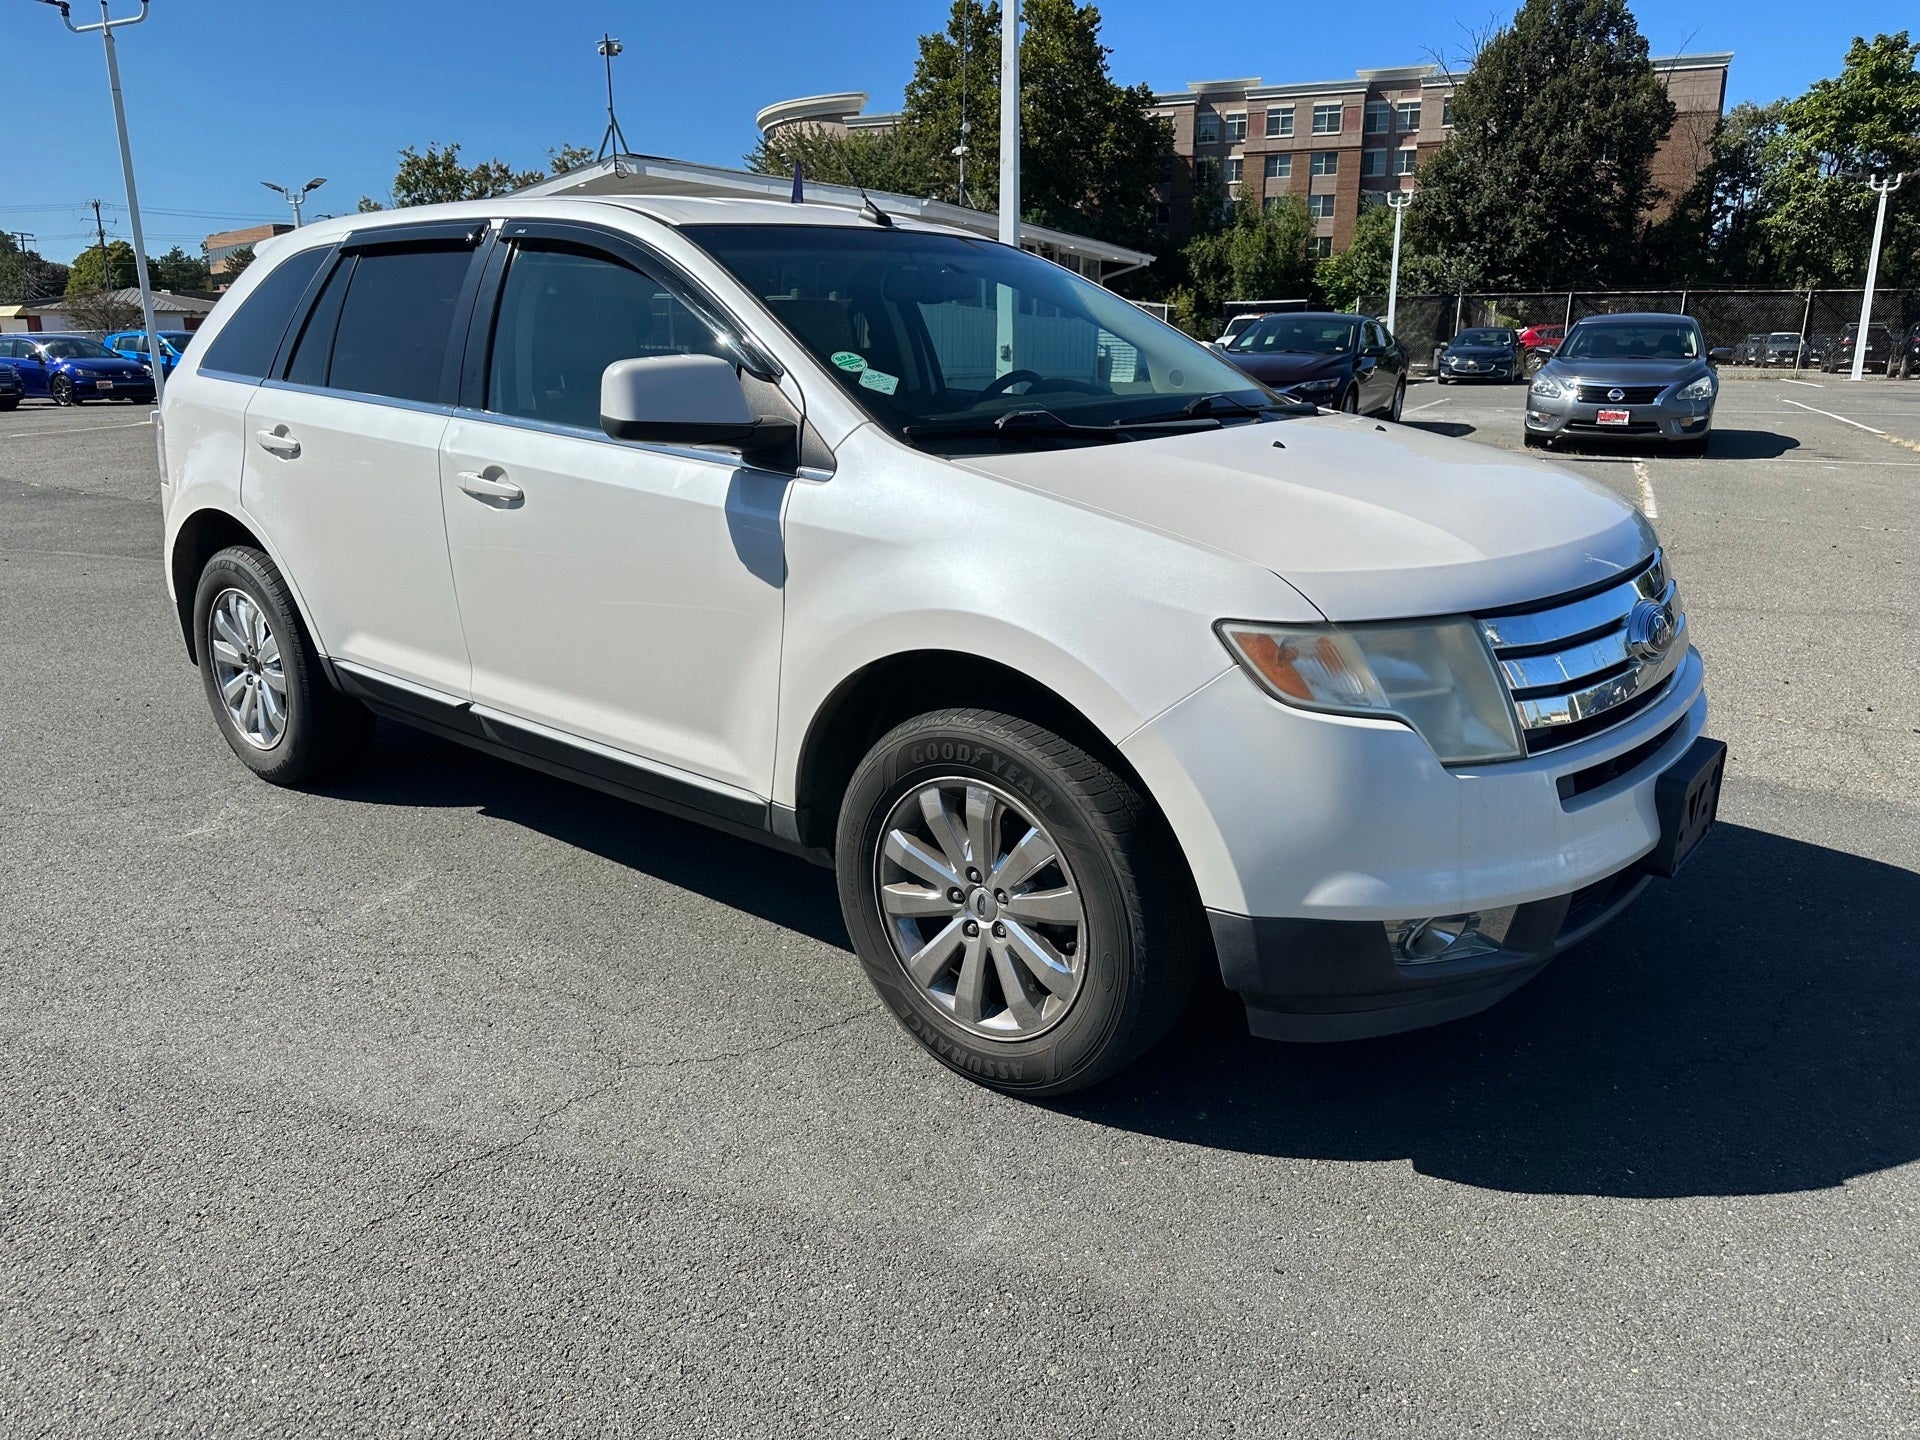 Used 2009 Ford Edge Limited with VIN 2FMDK39C49BA54032 for sale in Fairfax, VA